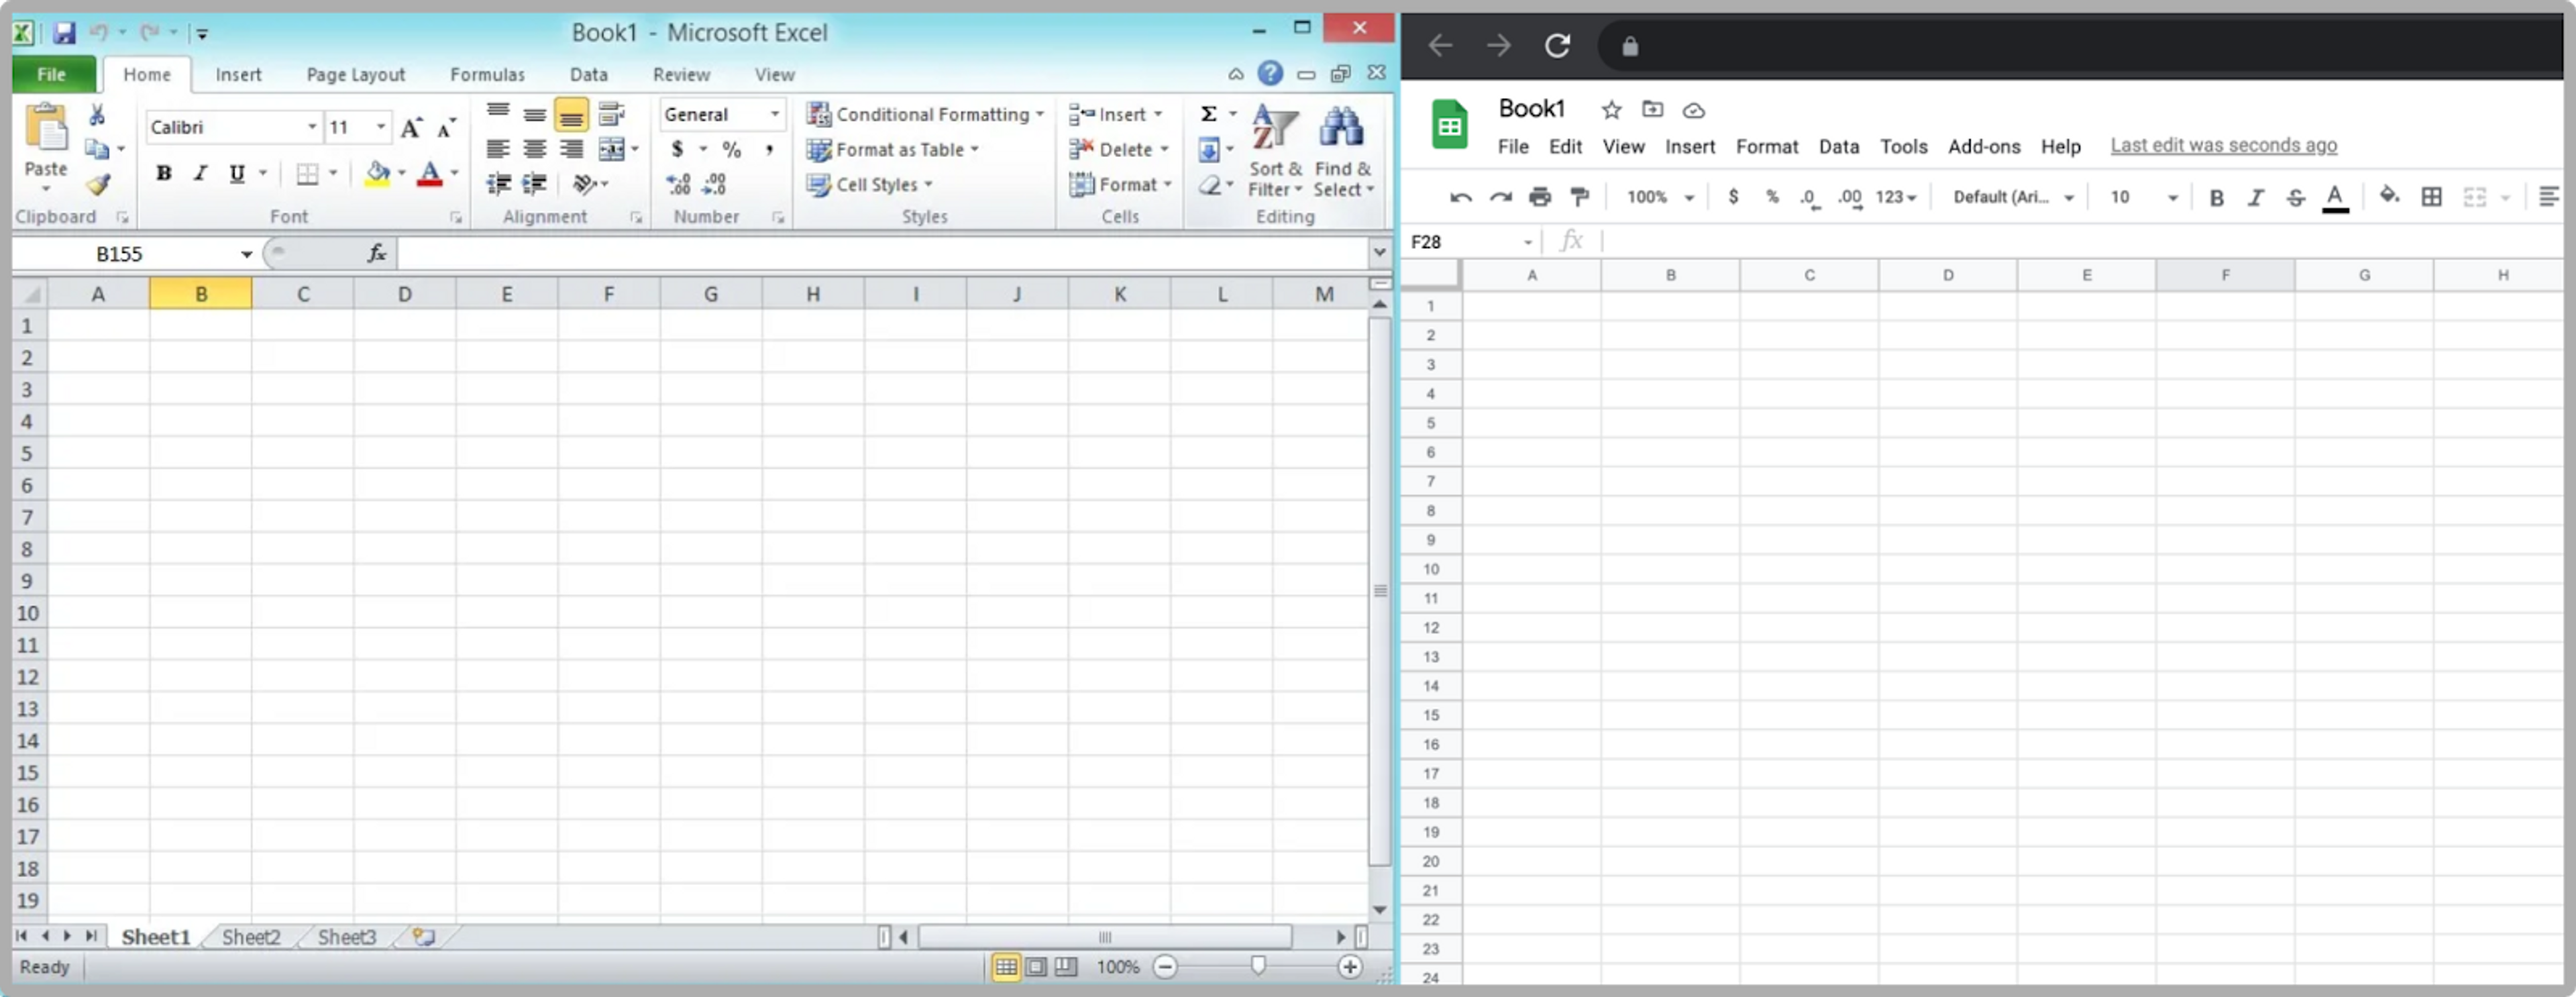 Google Sheets works in-browser